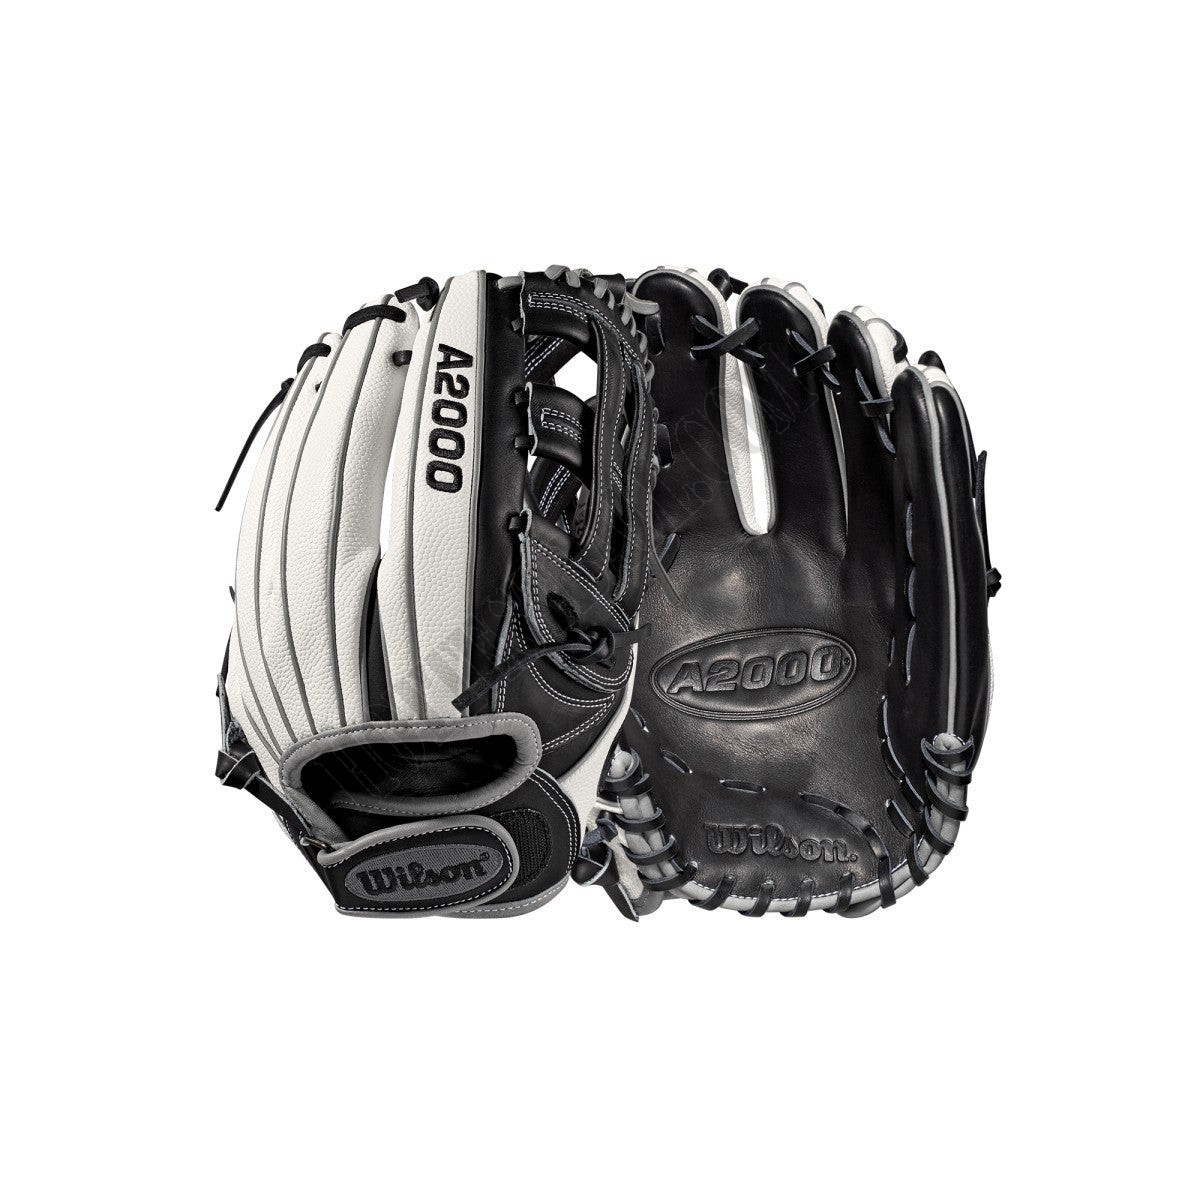 2019 A2000 FP12 SuperSkin 12" Infield Fastpitch Glove - Right Hand Throw ● Wilson Promotions - 2019 A2000 FP12 SuperSkin 12" Infield Fastpitch Glove - Right Hand Throw ● Wilson Promotions